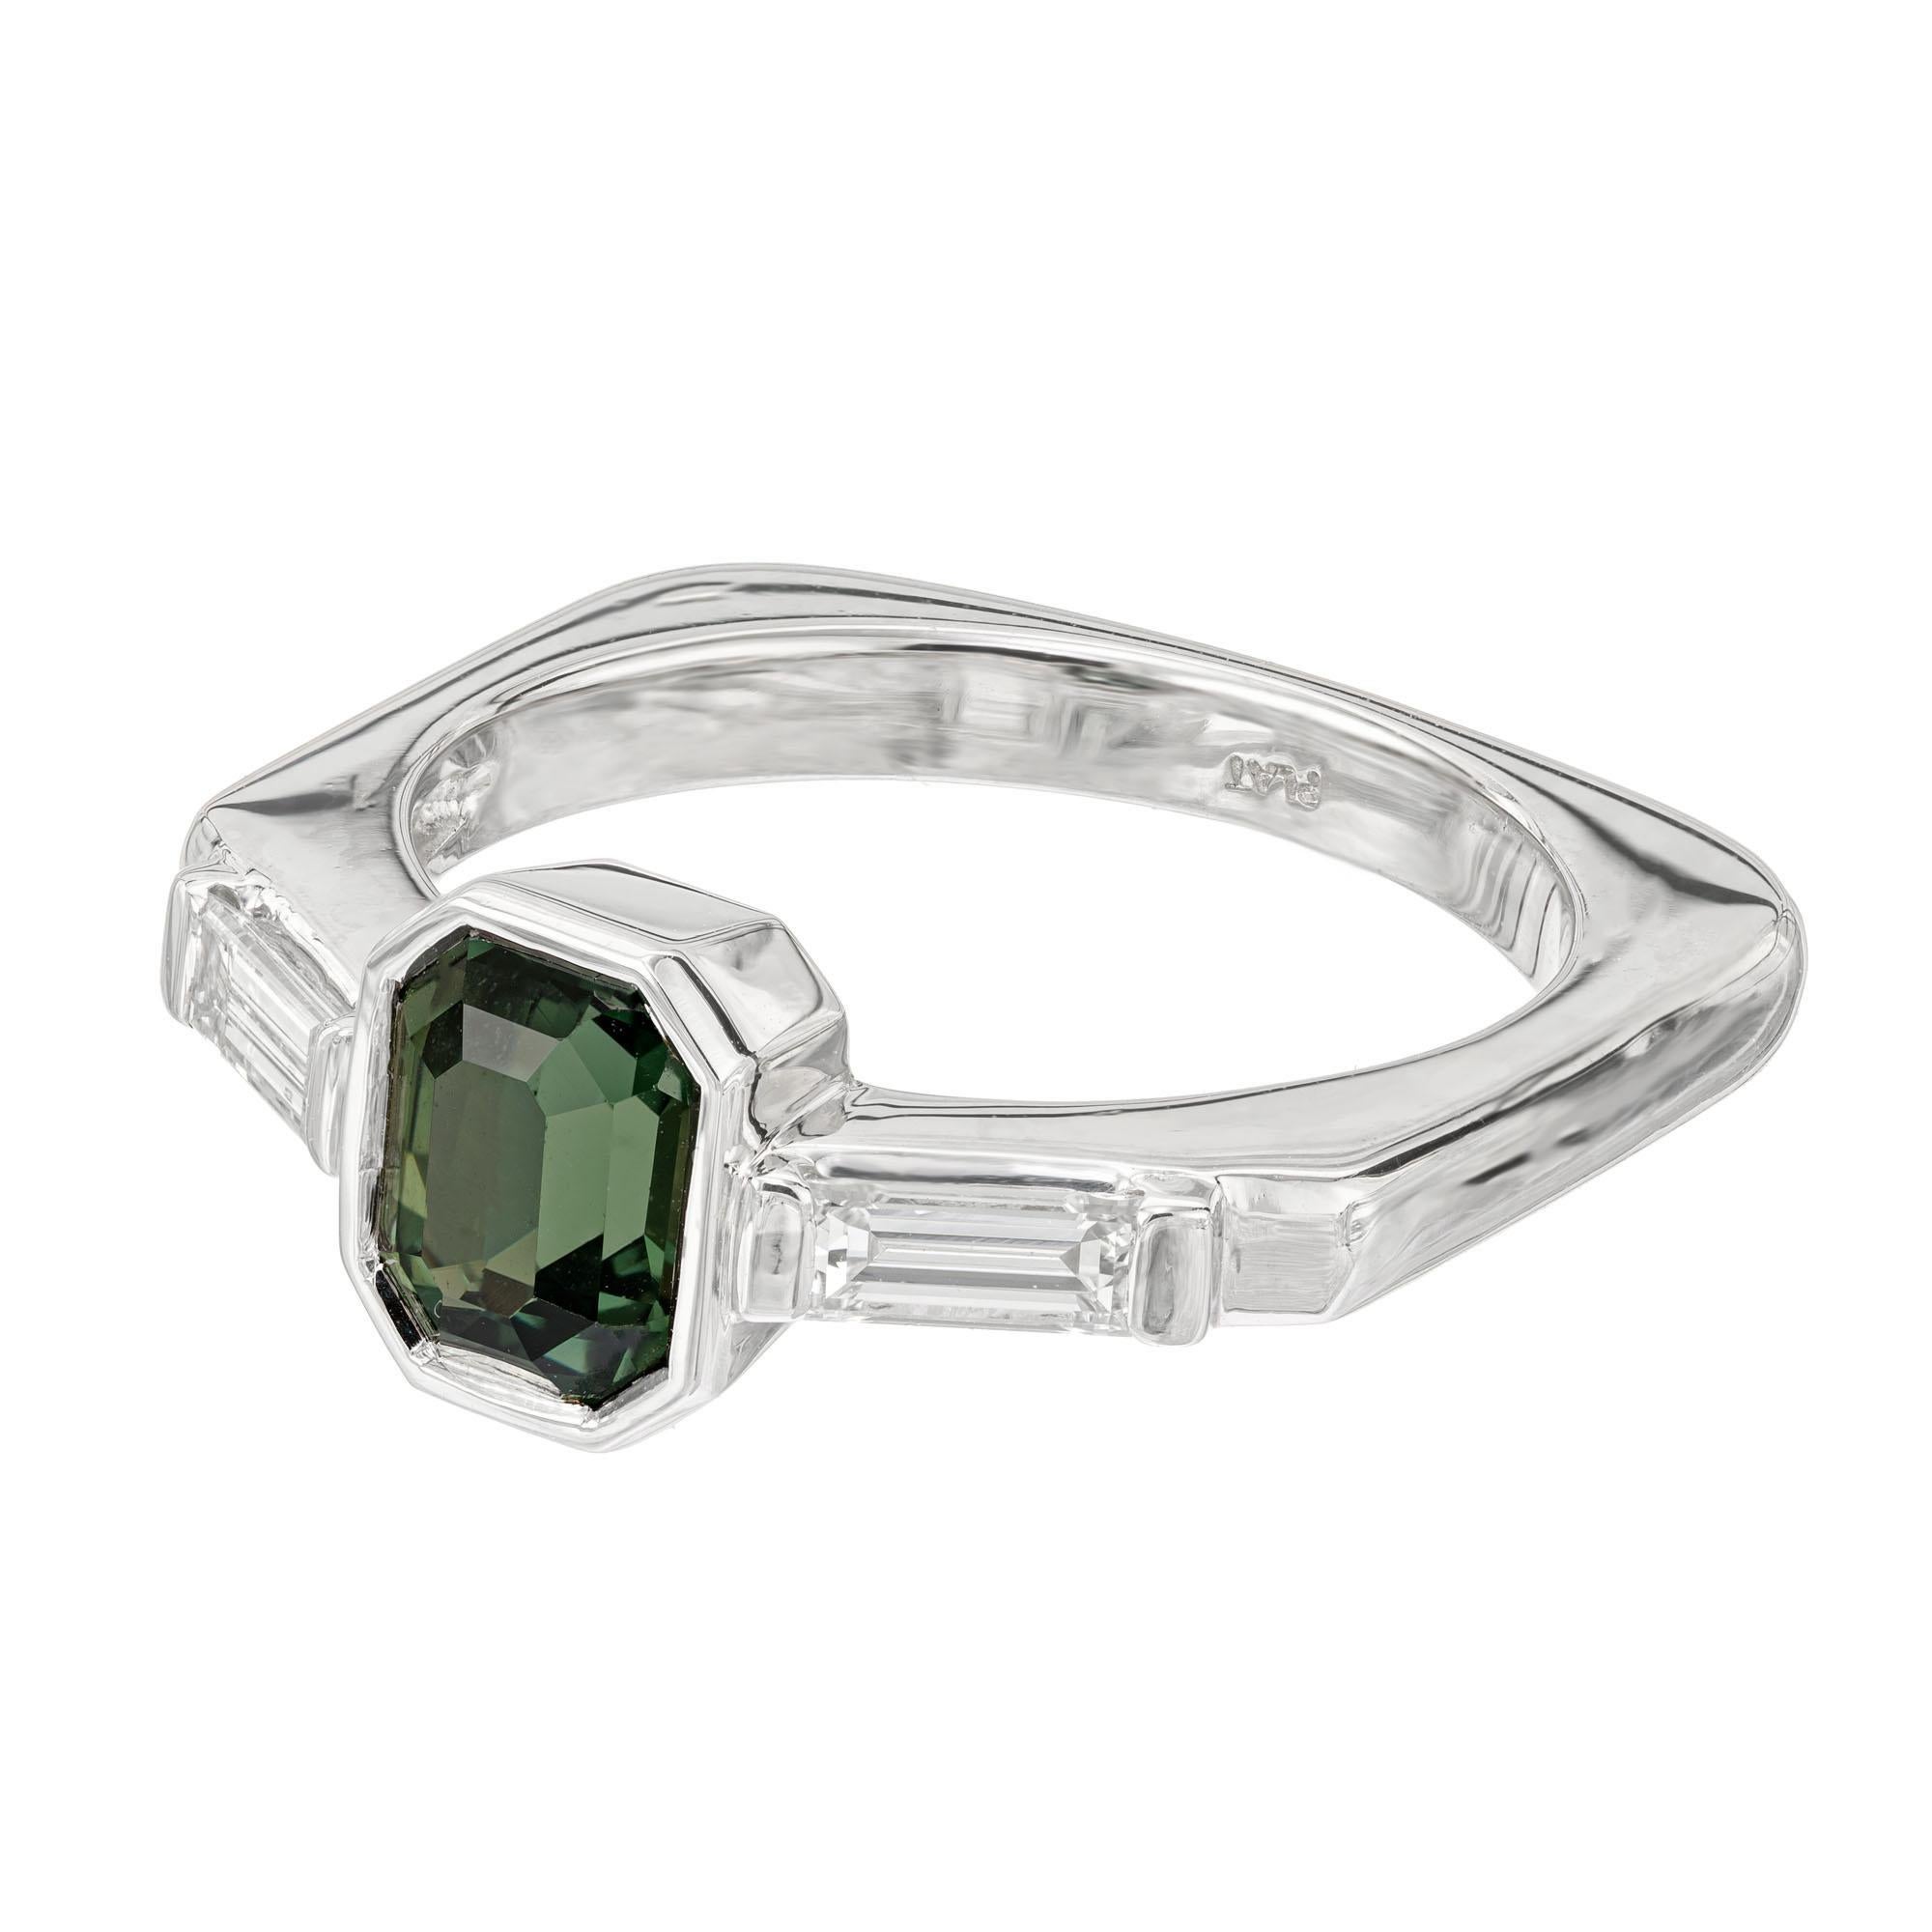 Sapphire and diamond three stone engagement ring. GIA certified octagonal green center sapphire with 2 straight cut baguette diamonds, set in platinum. Natural untreated green sapphire from a 1920's estate. Designed and crafted in the Peter Suchy